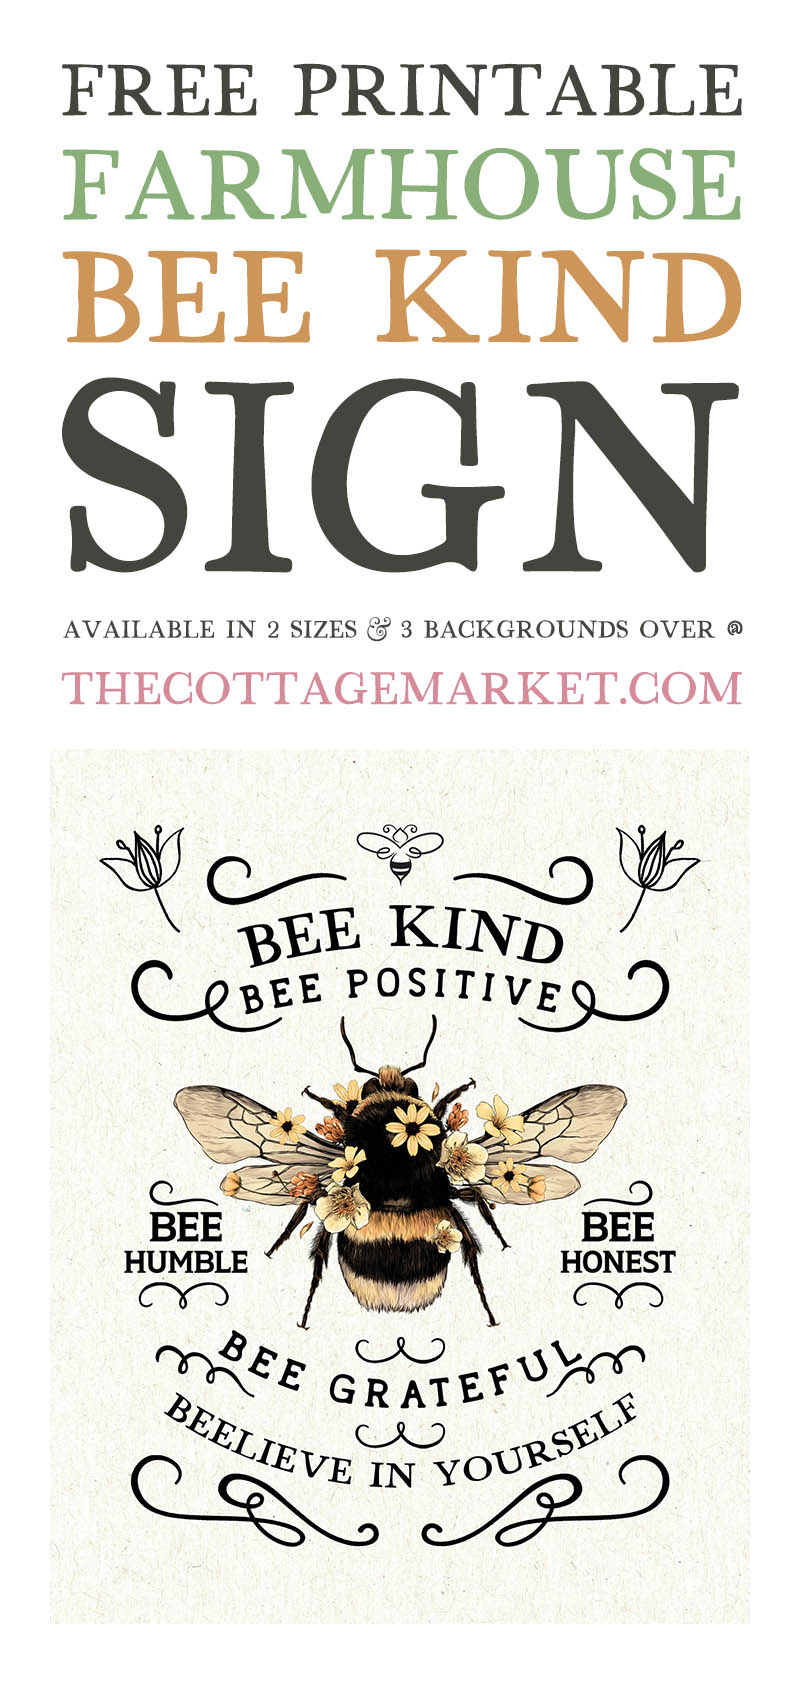 This Free Printable Farmhouse Bee Kind Sign will bring instant charm and extra love to your home.